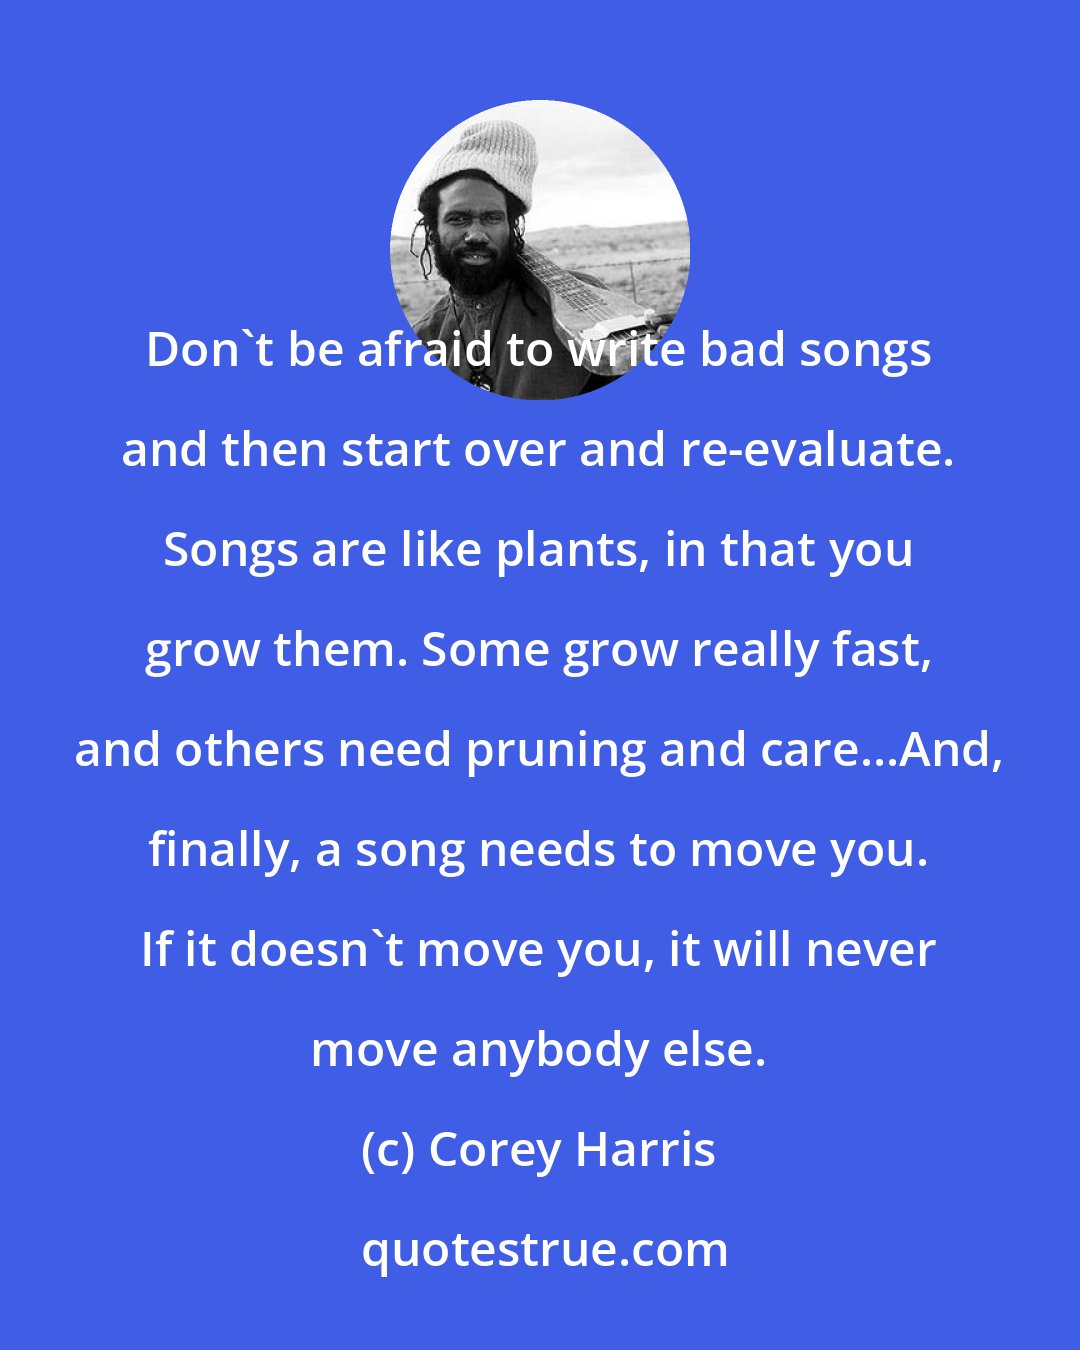 Corey Harris: Don't be afraid to write bad songs and then start over and re-evaluate. Songs are like plants, in that you grow them. Some grow really fast, and others need pruning and care...And, finally, a song needs to move you. If it doesn't move you, it will never move anybody else.